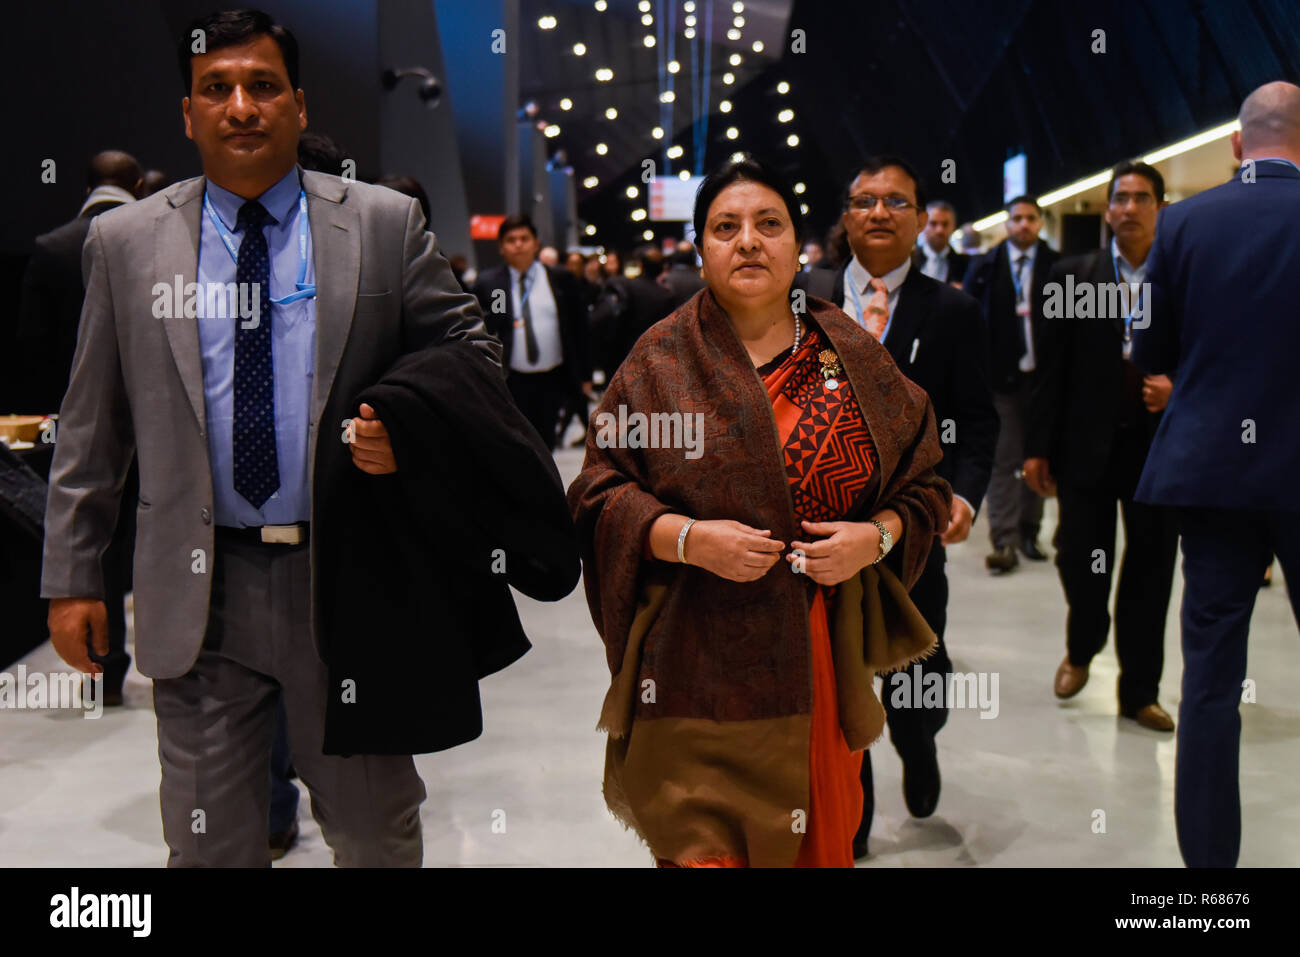 Katowice, Poland. 4th Dec, 2018. Bidhya Devi Bhandari, President of Nepal seen walking as she exits a plenary session at the COP24 UN Climate Change Conference 2018. Credit: Omar Marques/SOPA Images/ZUMA Wire/Alamy Live News Stock Photo